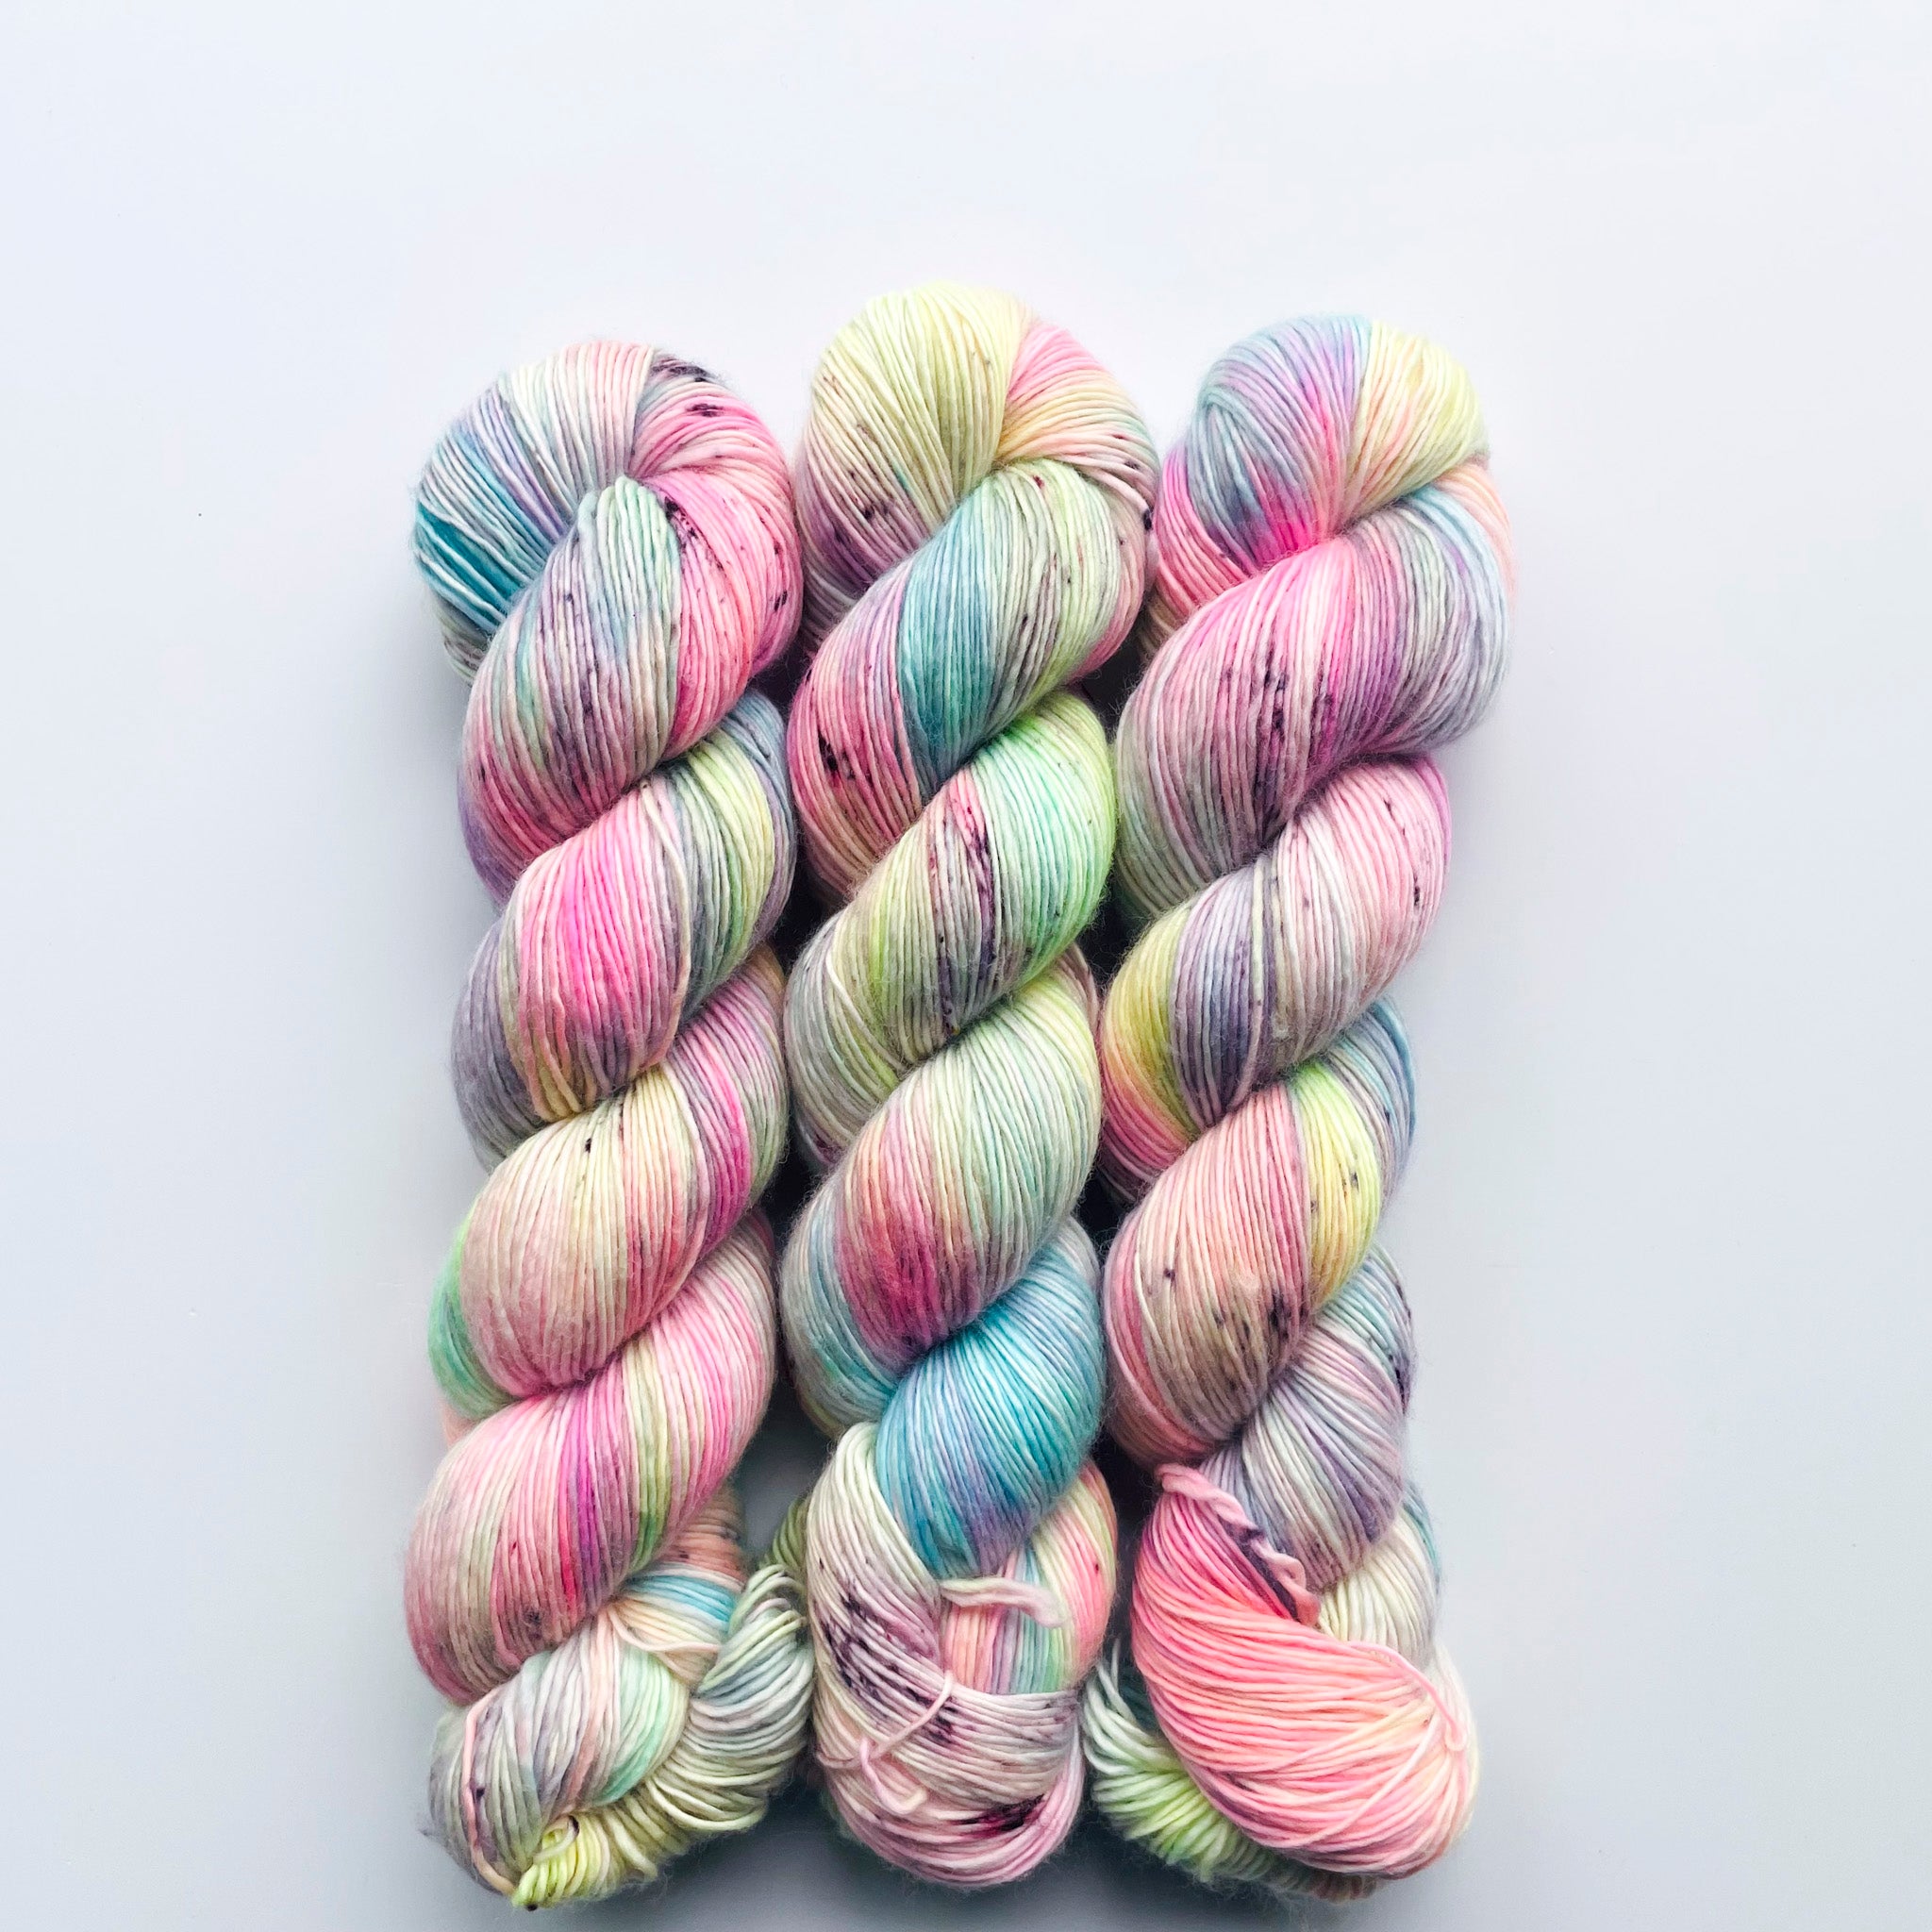 Yarn In Stock - Qing Fibre - Indie Hand-Dyed Yarn